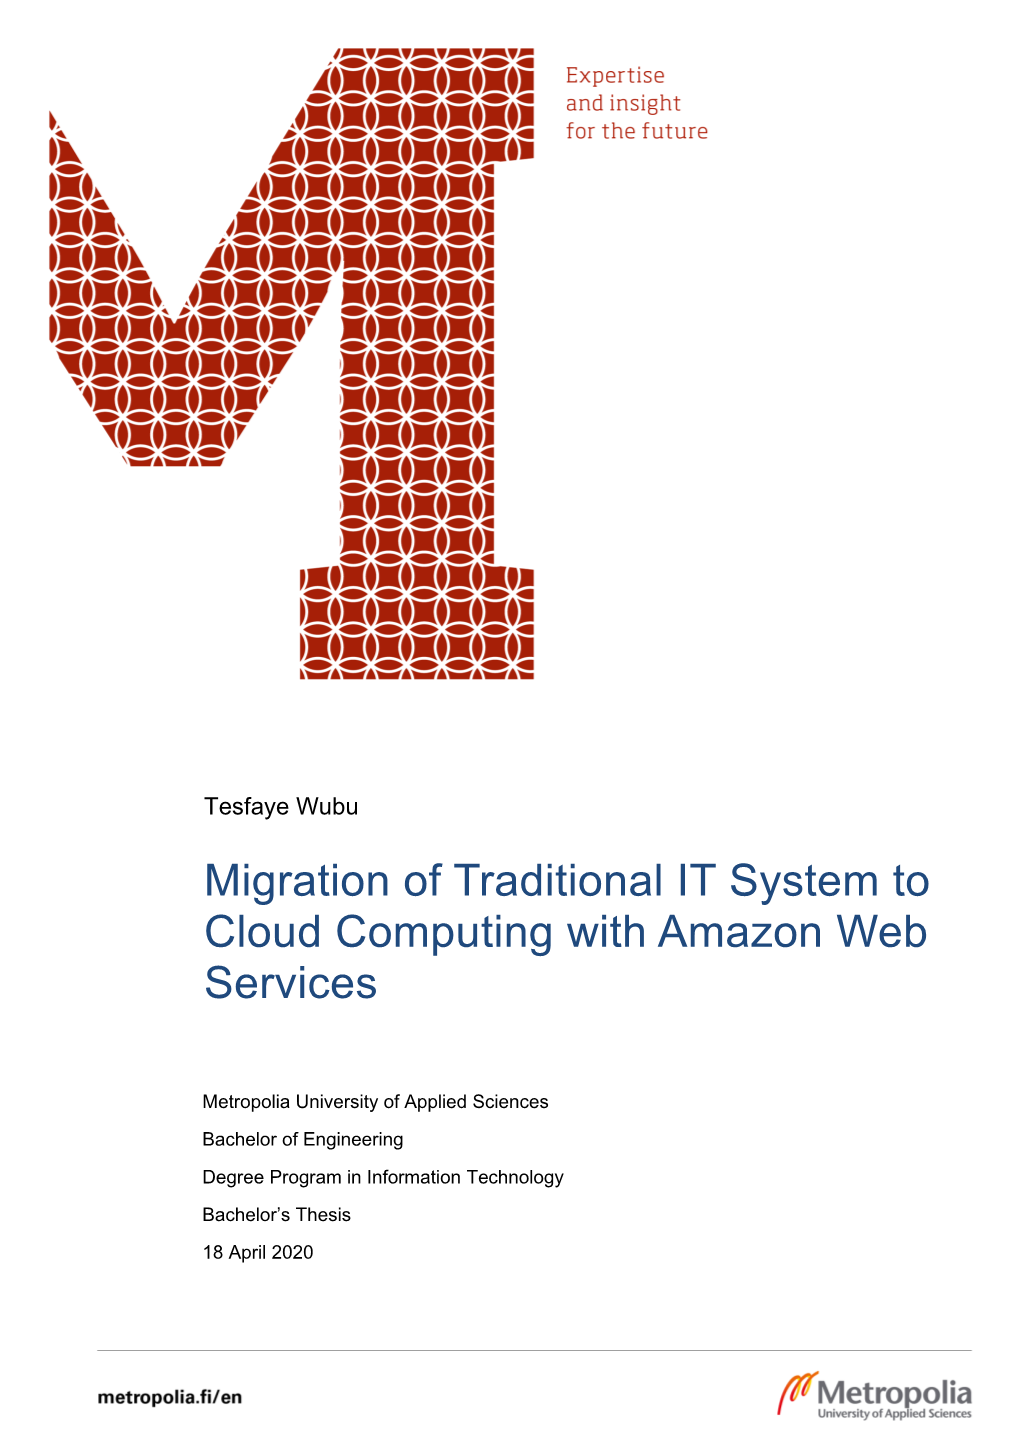 Migration of Traditional IT System to Cloud Computing with Amazon Web Services